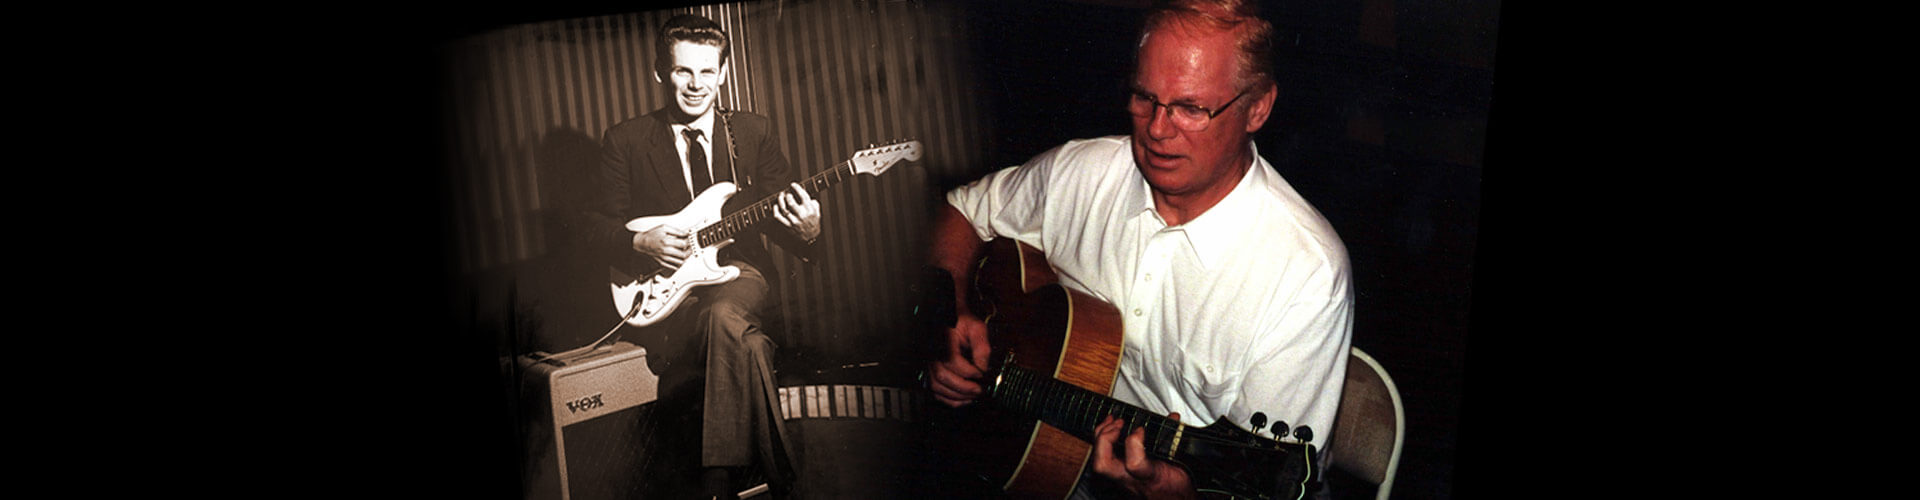 old picture of artist, Vic Flick, beside current picture of him playing accoustic guitar